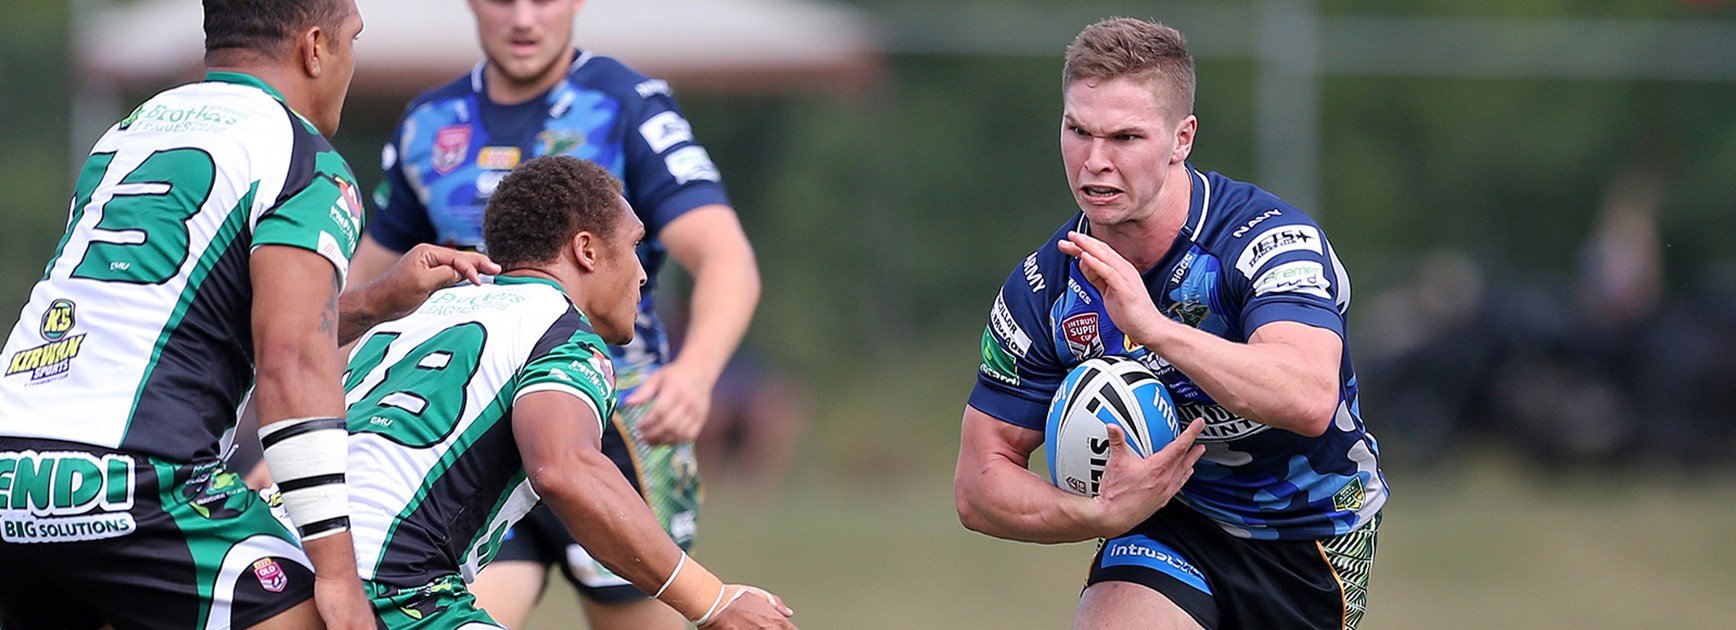 The battle between hookers Matt Parcell (pictured) and Anthony Mitchell will be a feature of the Intrust Super Cup Grand Final on Sunday.